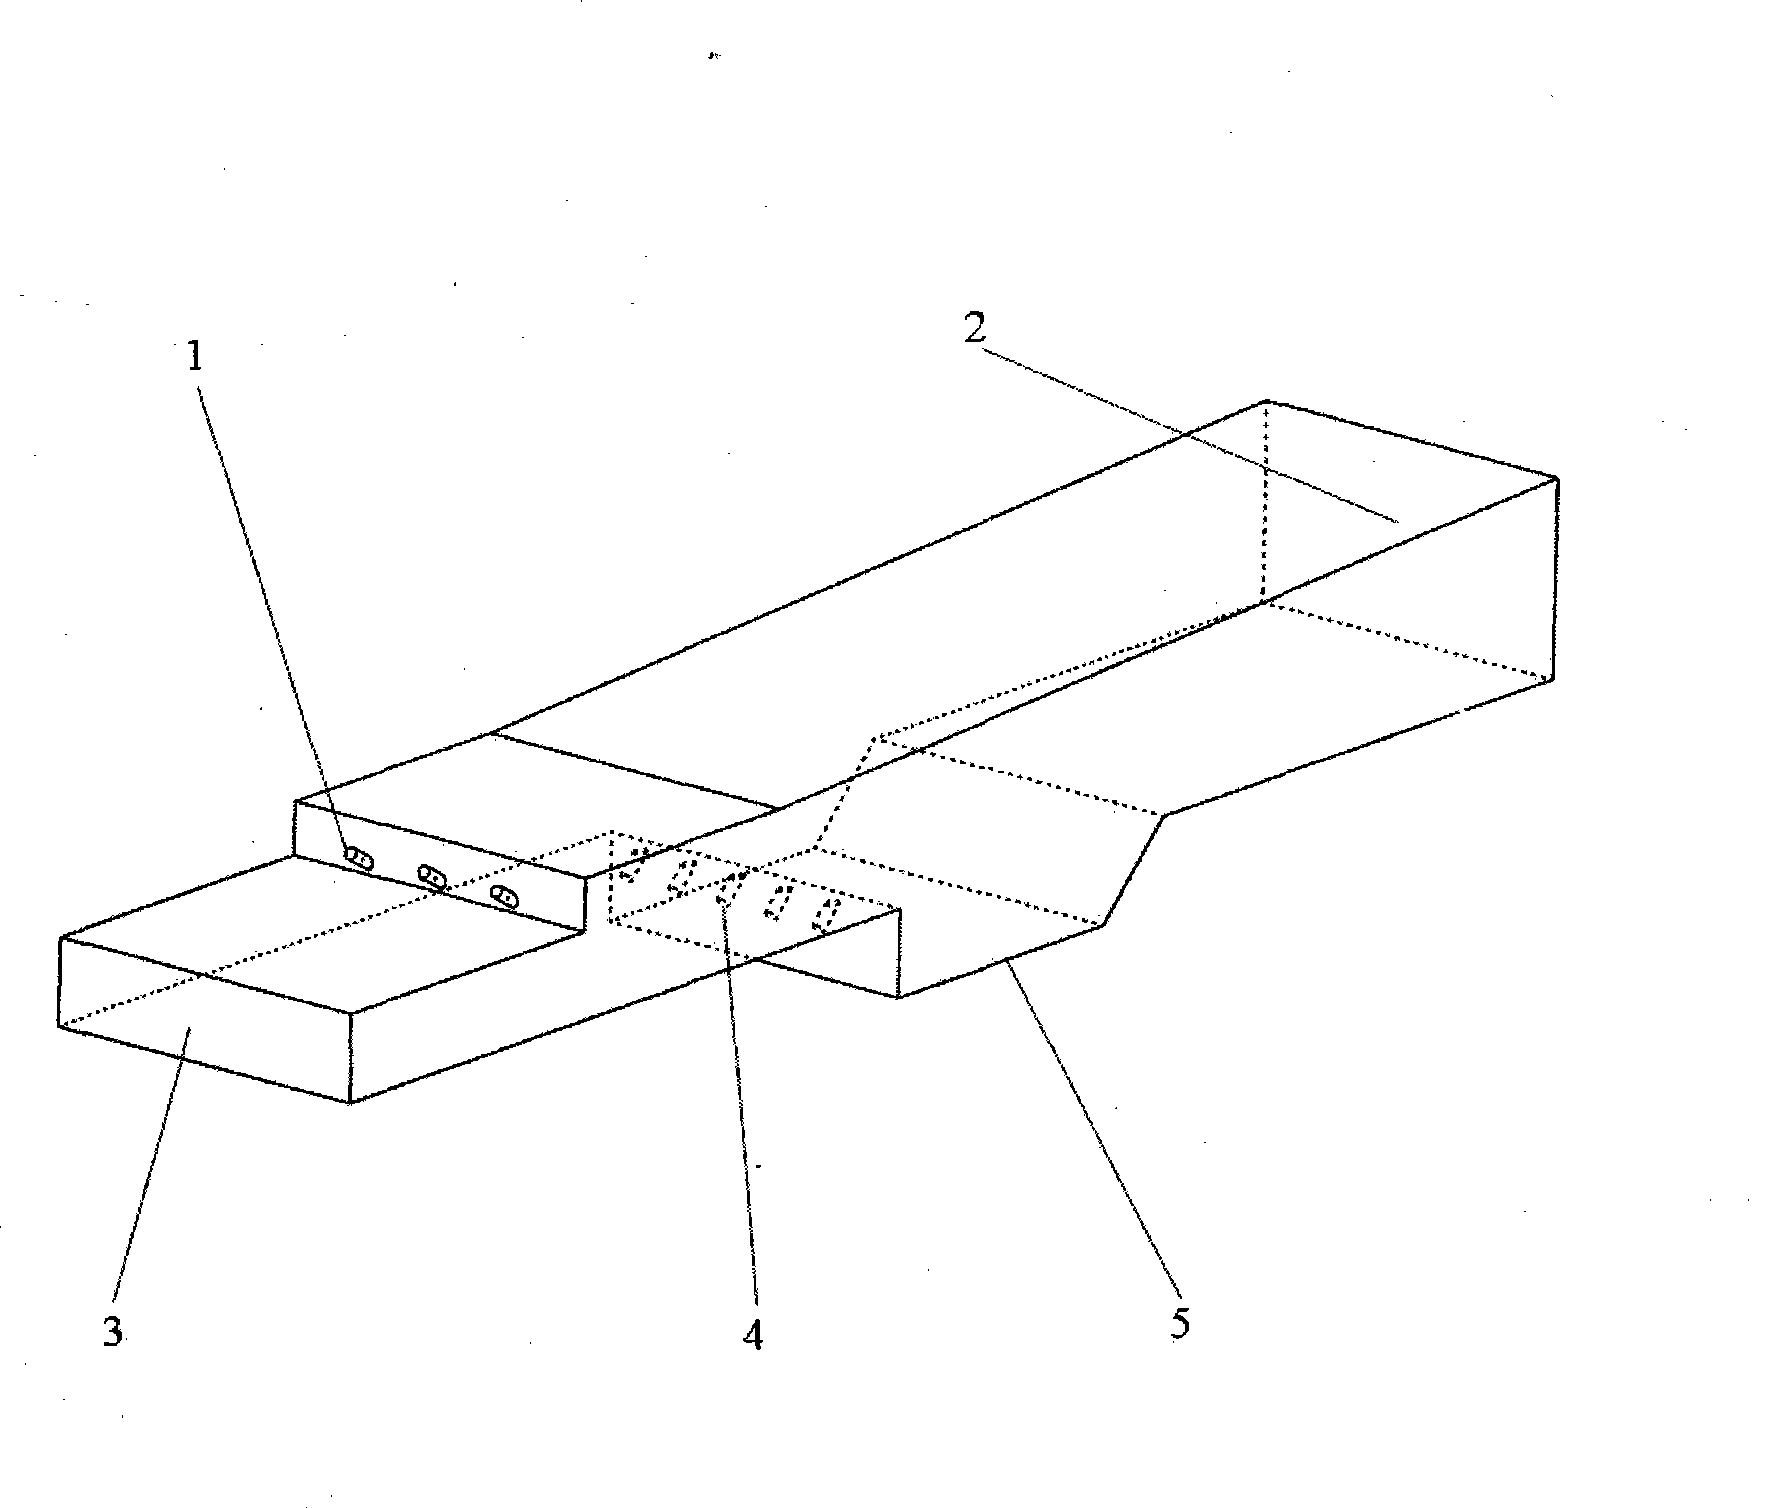 Supersonic speed combustion chamber scheme of step / groove composite injection structure